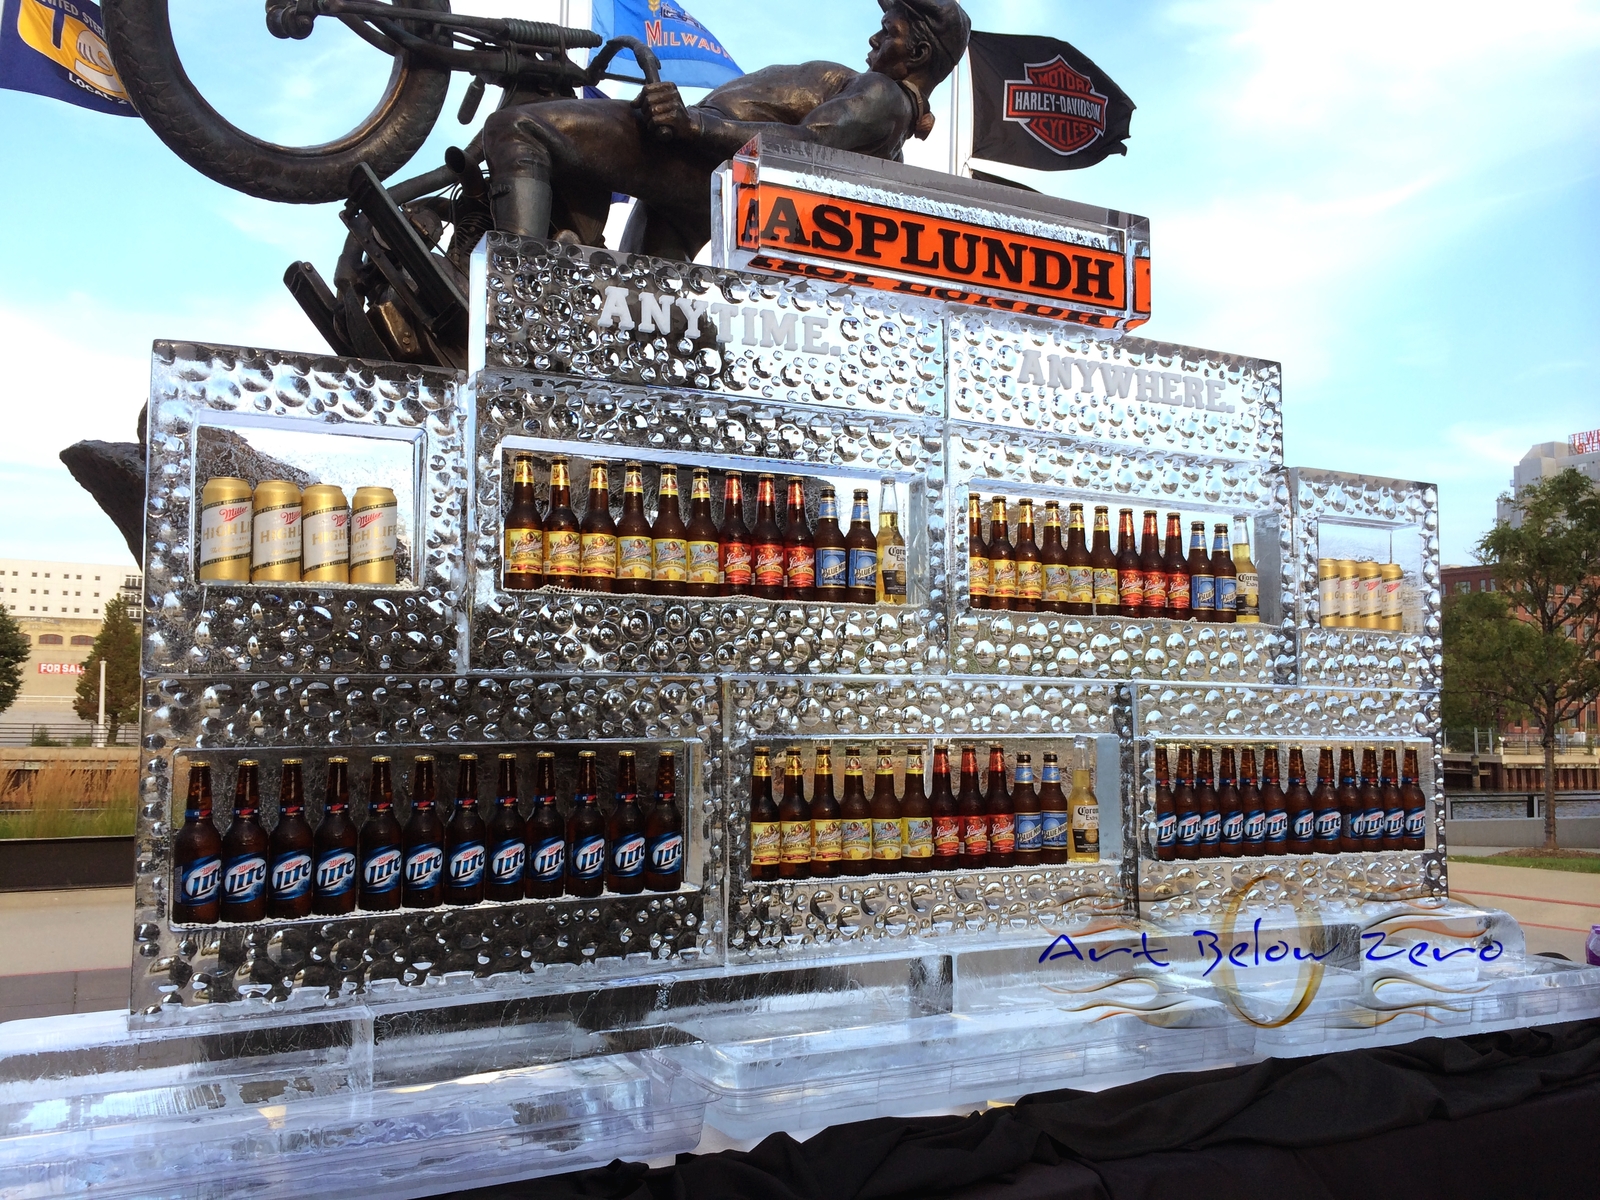 Beer_wall_ice_sculpture_for_asplandh_at_the_harley_davidson_museum_milwaukee